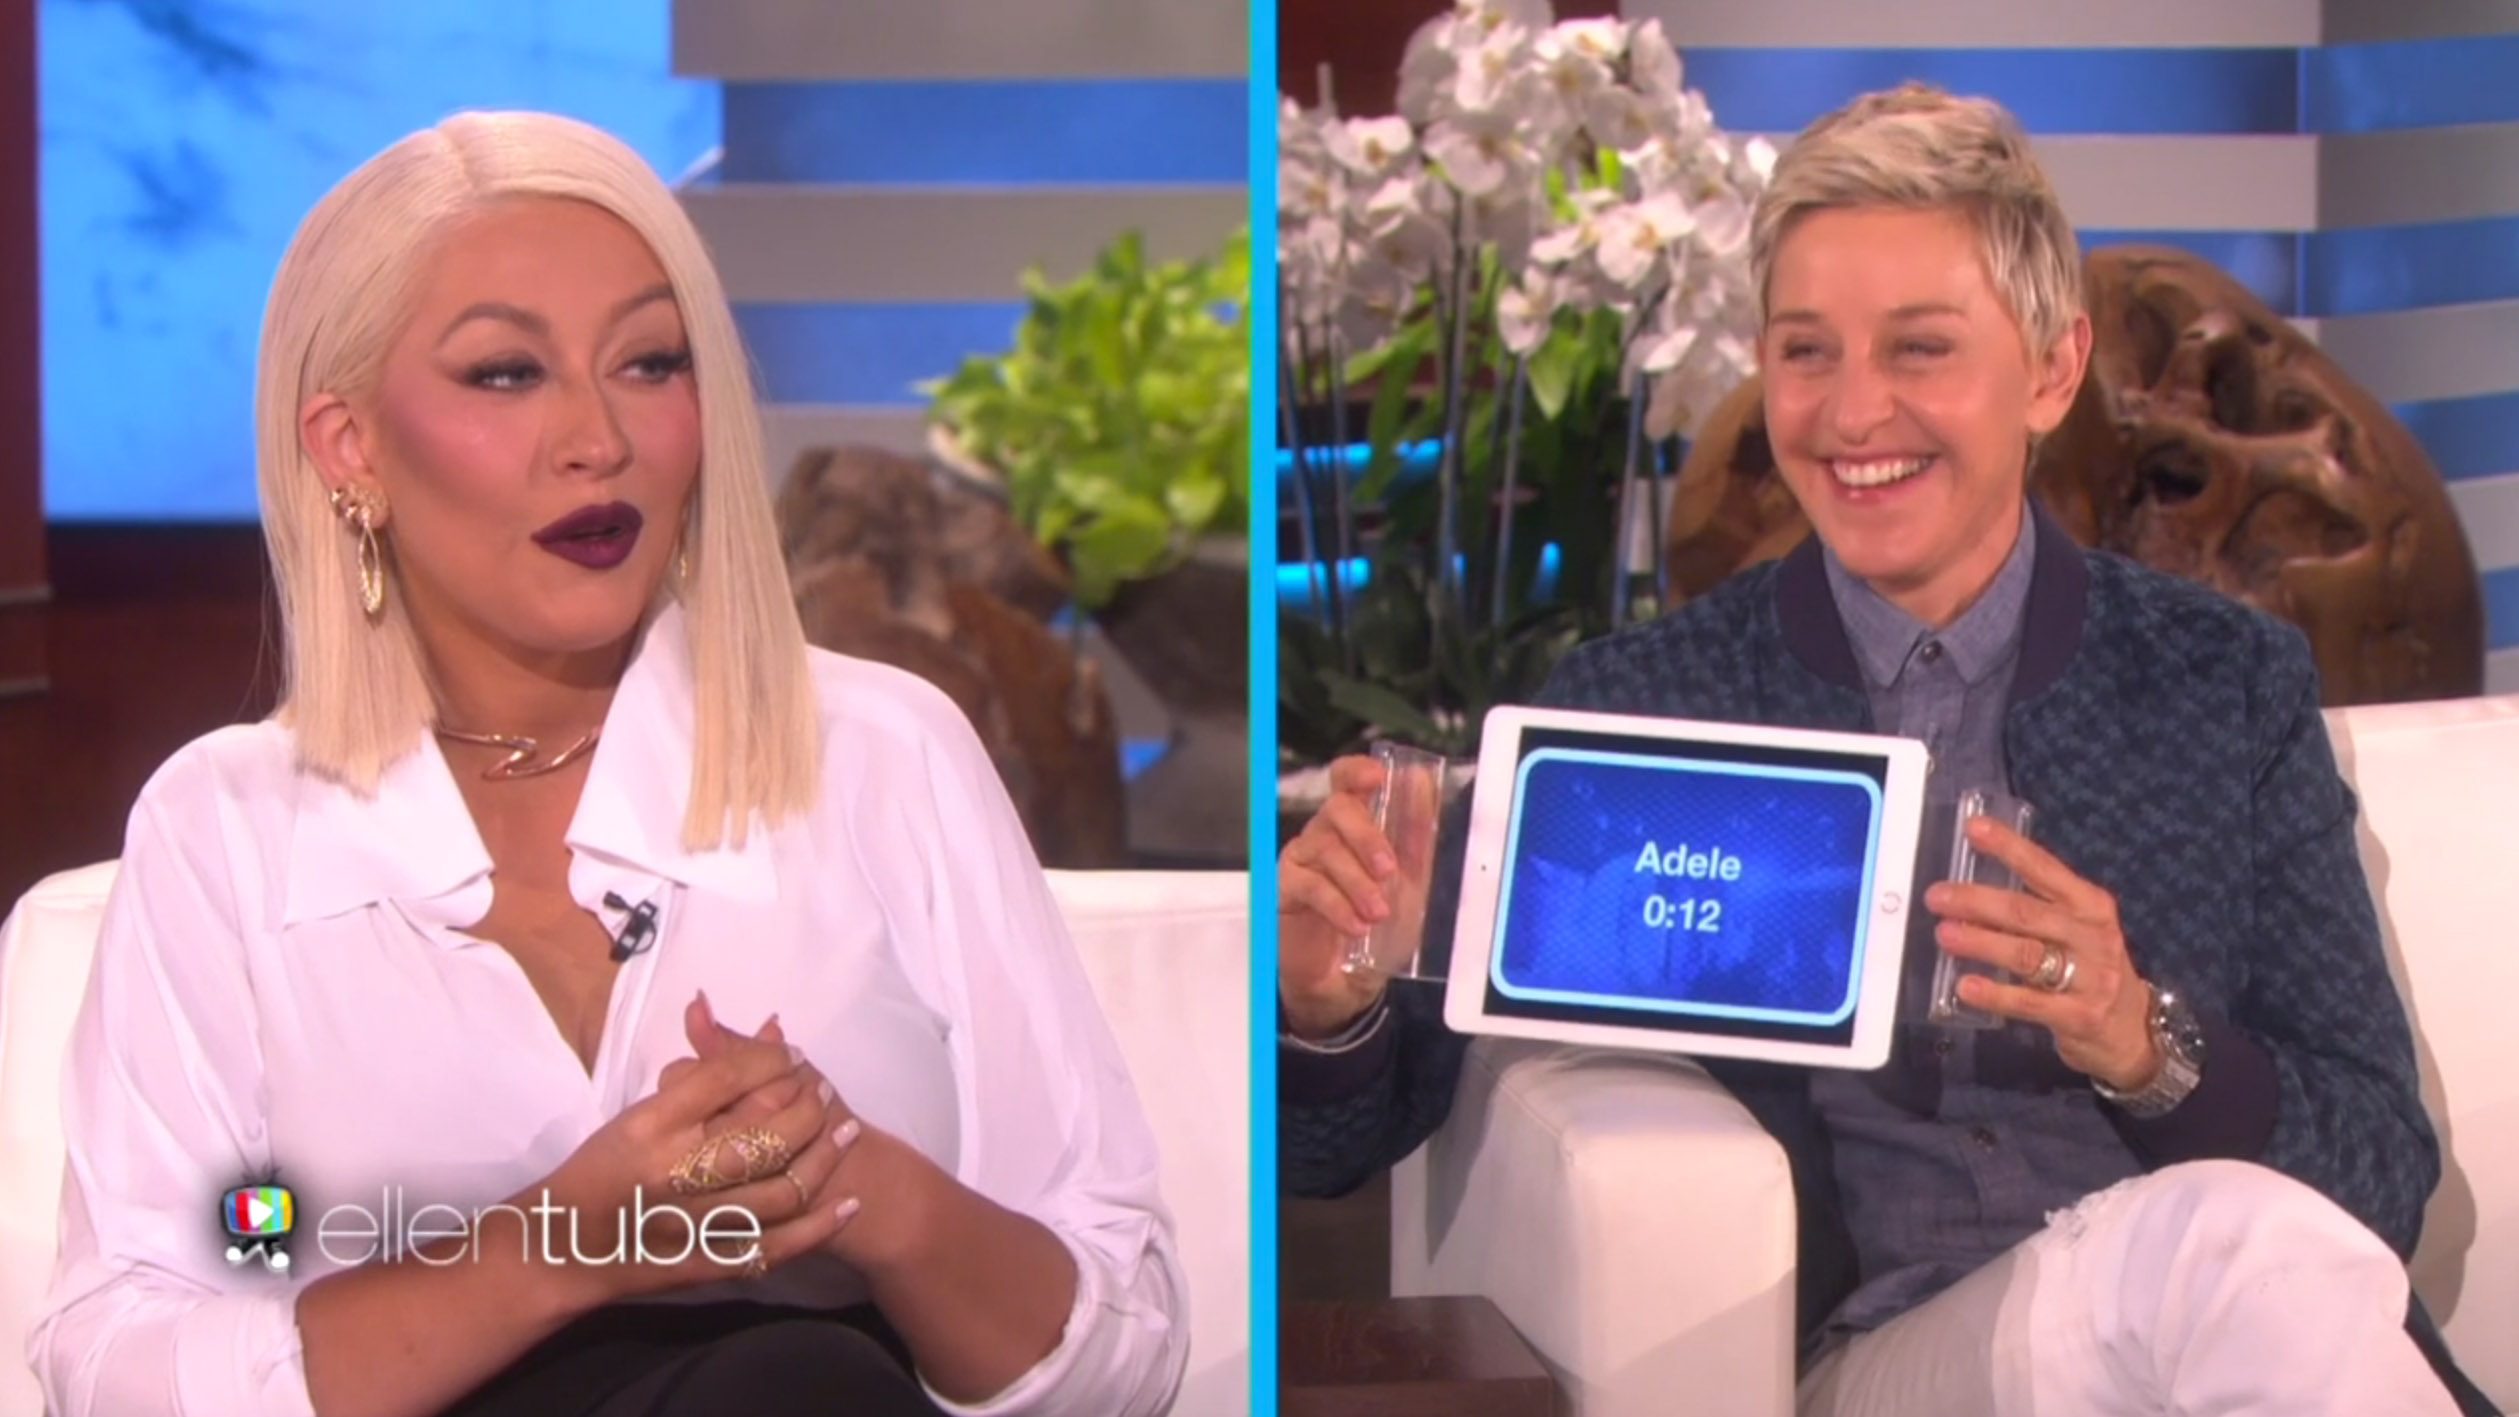 WATCH: Christina Aguilera’s impressions of Adele, Rihanna, Katy Perry and more on ‘Ellen’